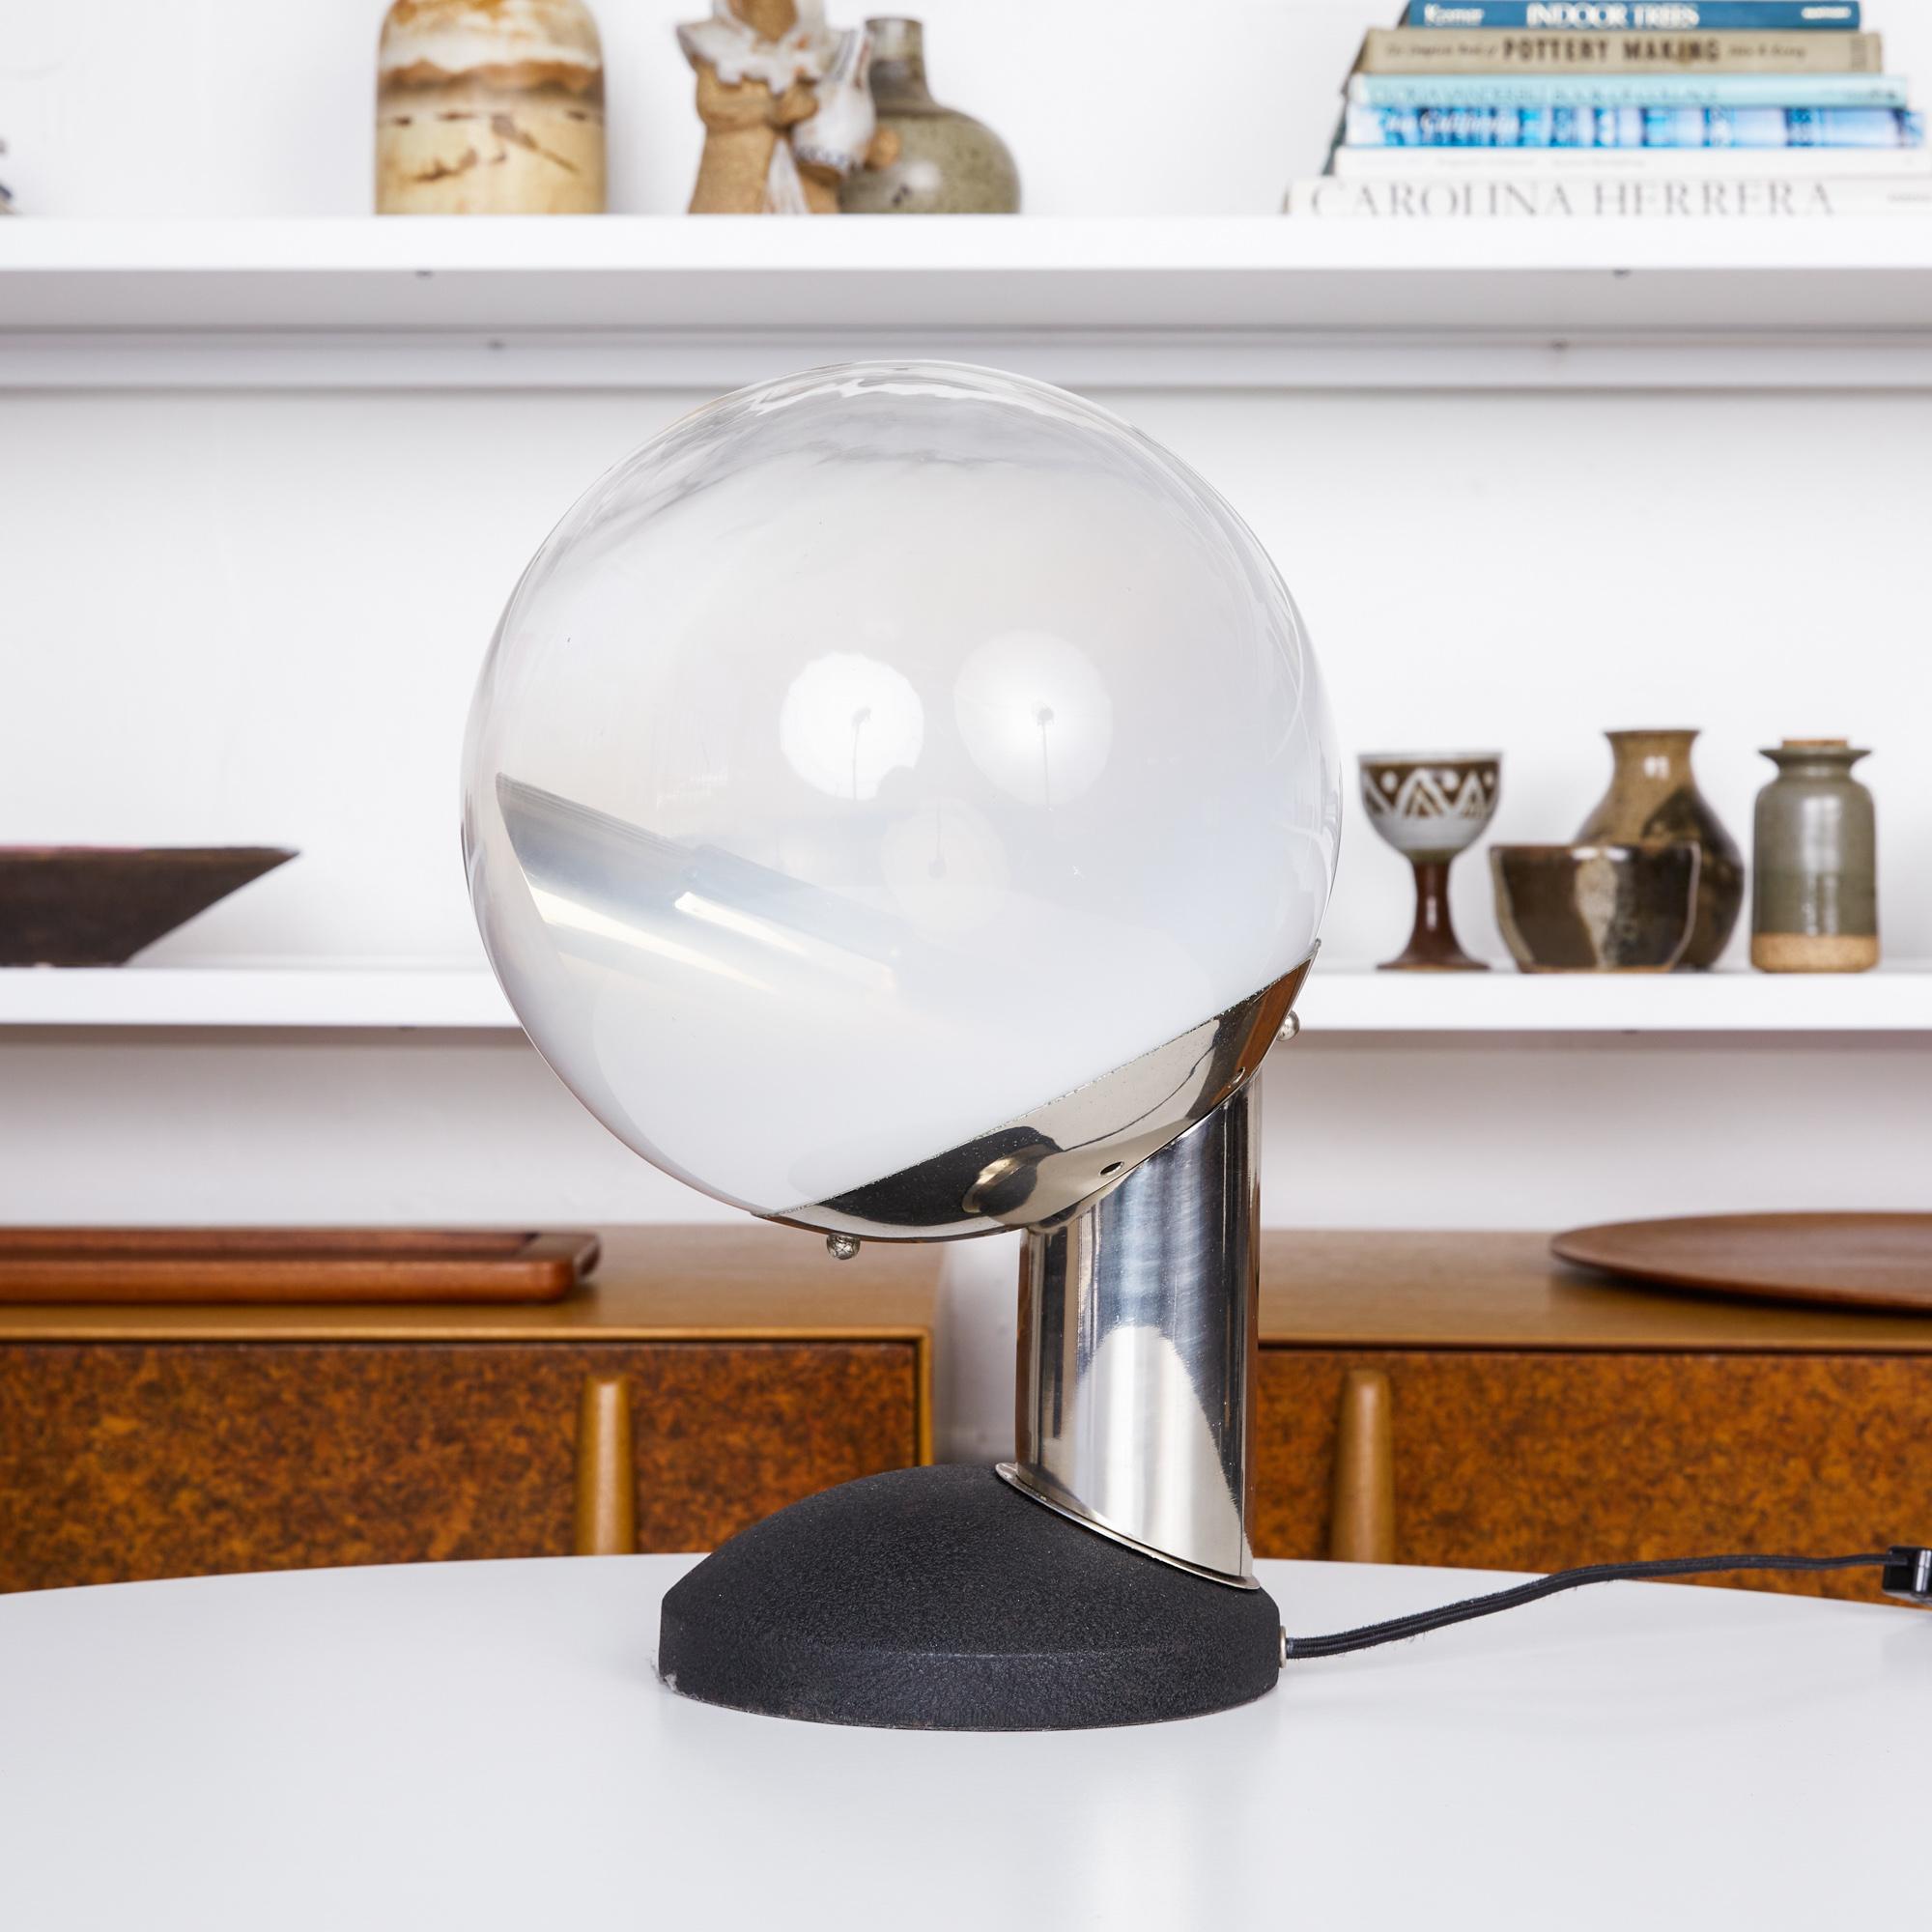 Glass globe table lamp by Kosta, Sweden, circa 1960s. The Space Age style lamp features a frosted translucent glass globe supported by an articulating chrome stem that sits on a blackened steel base. The interior of the globe houses a chrome-plated